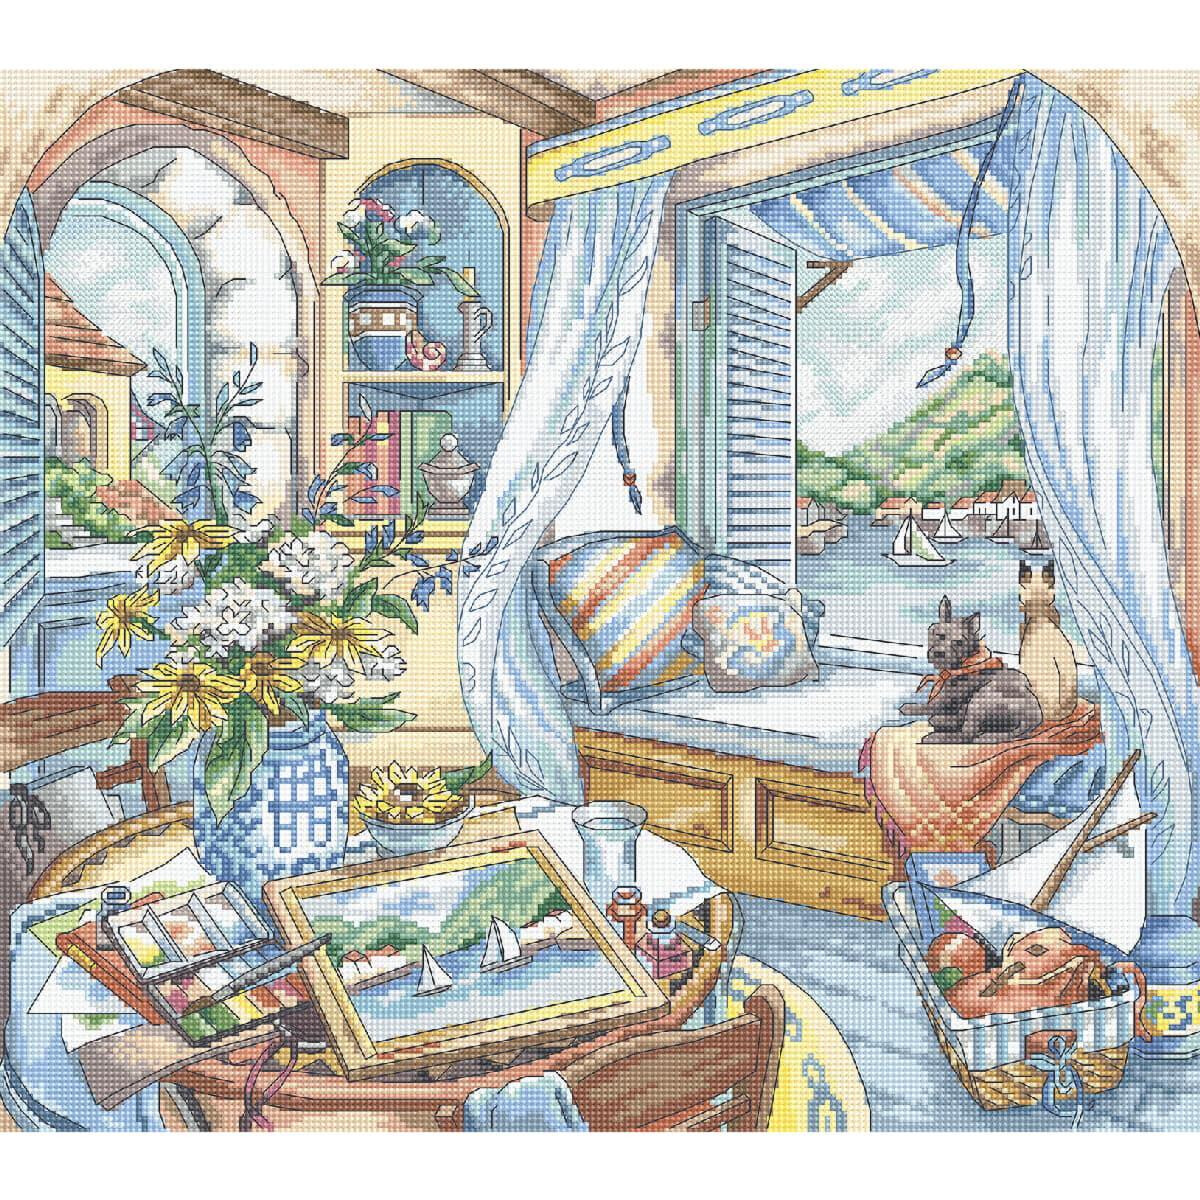 Letistitch counted cross stitch kit "Window...